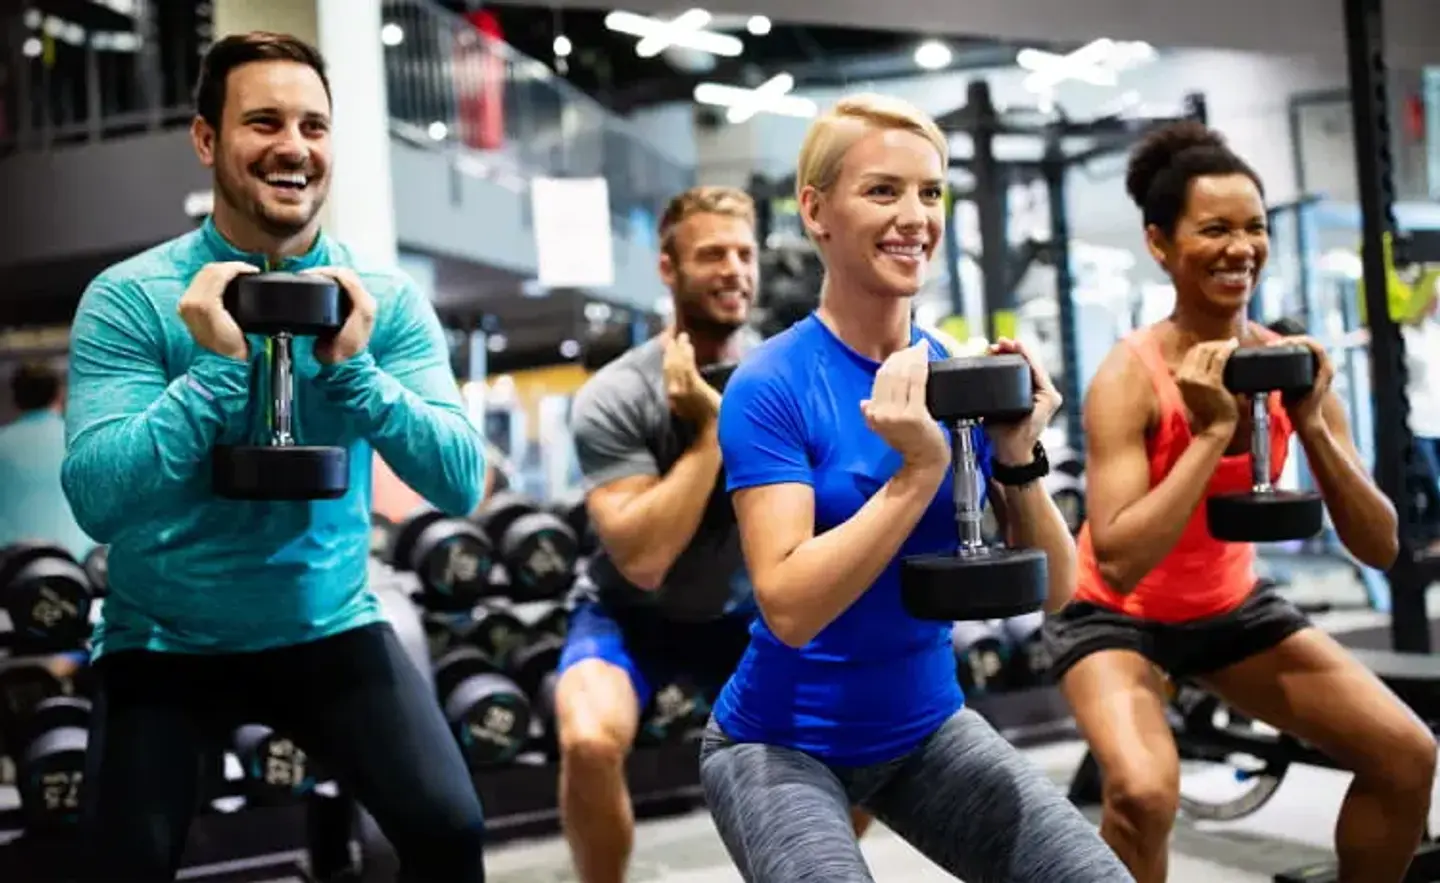 Group Fitness Instructors squatting with dumbbells